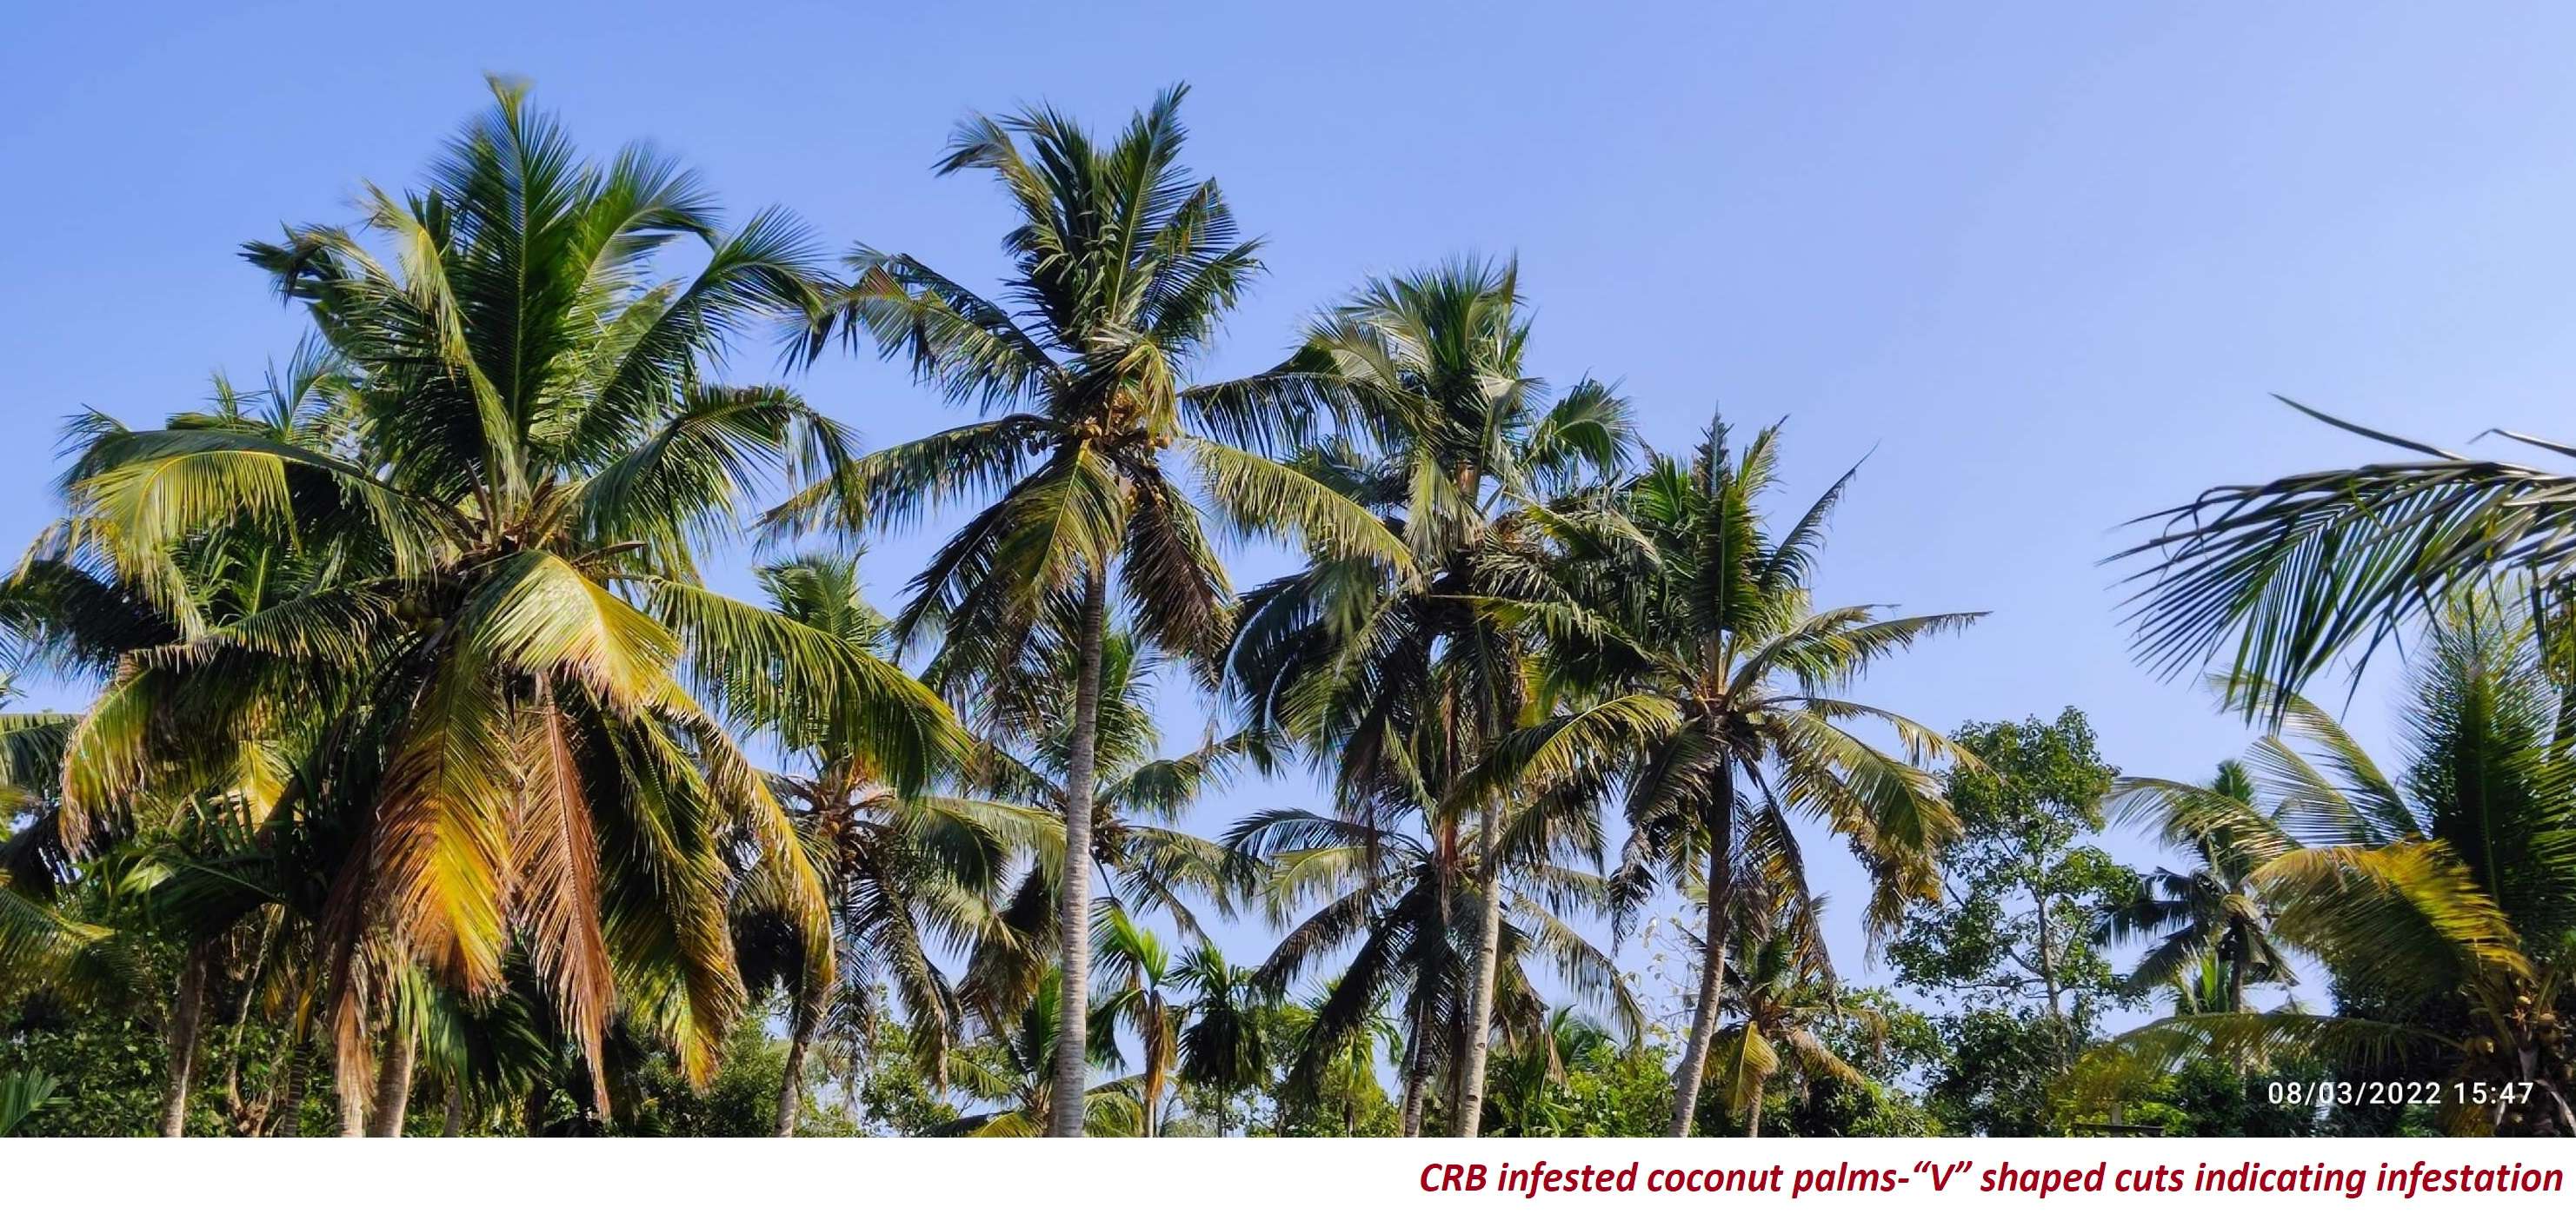 CRB infested coconut palms